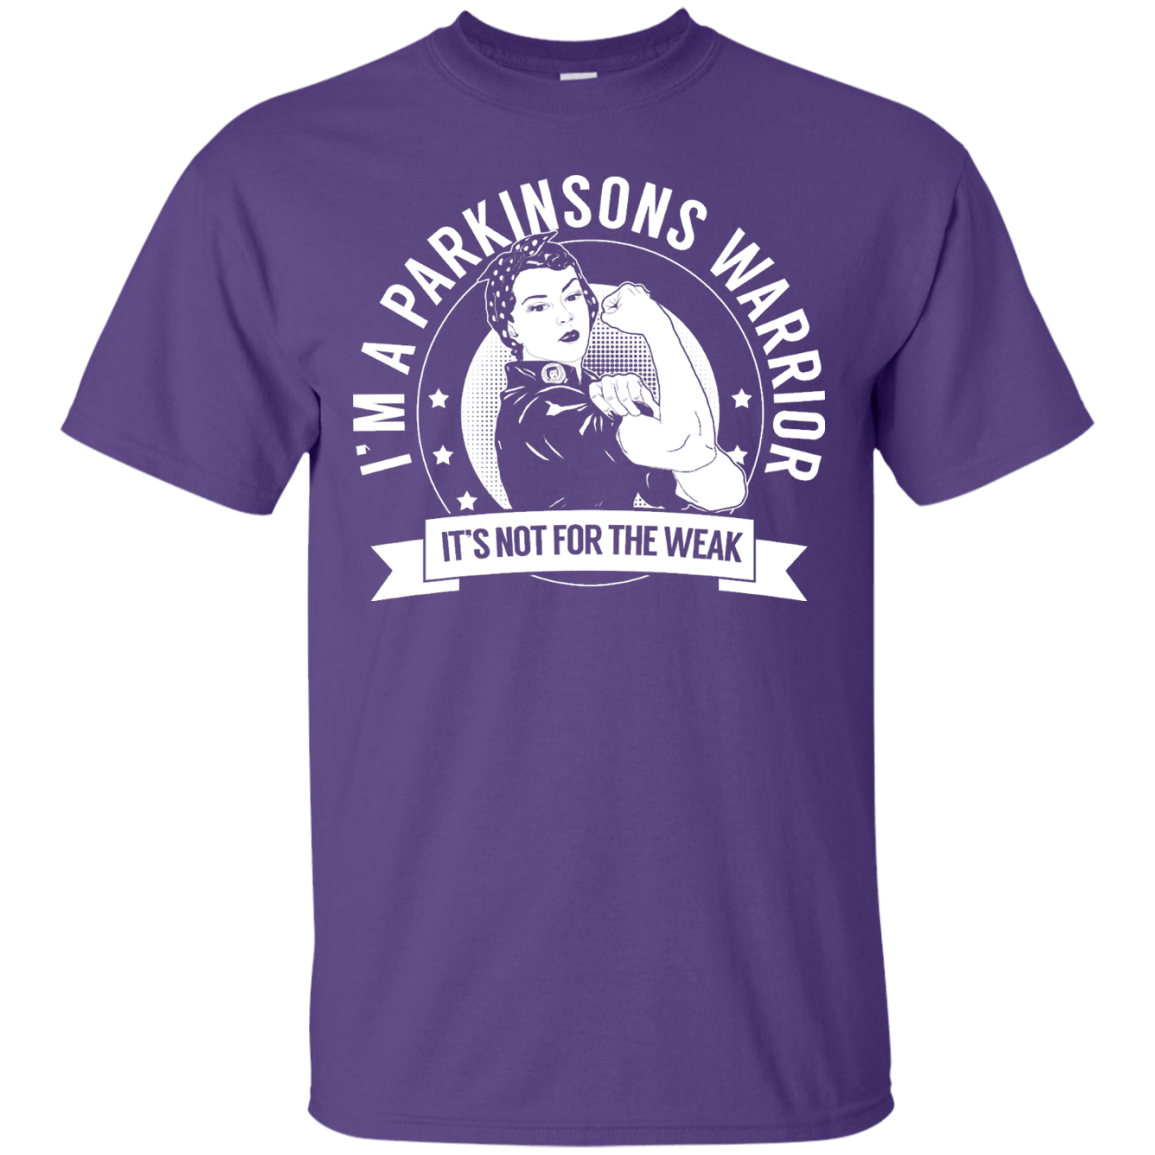 Parkinsons Warrior Not For The Weak Unisex Shirt - The Unchargeables